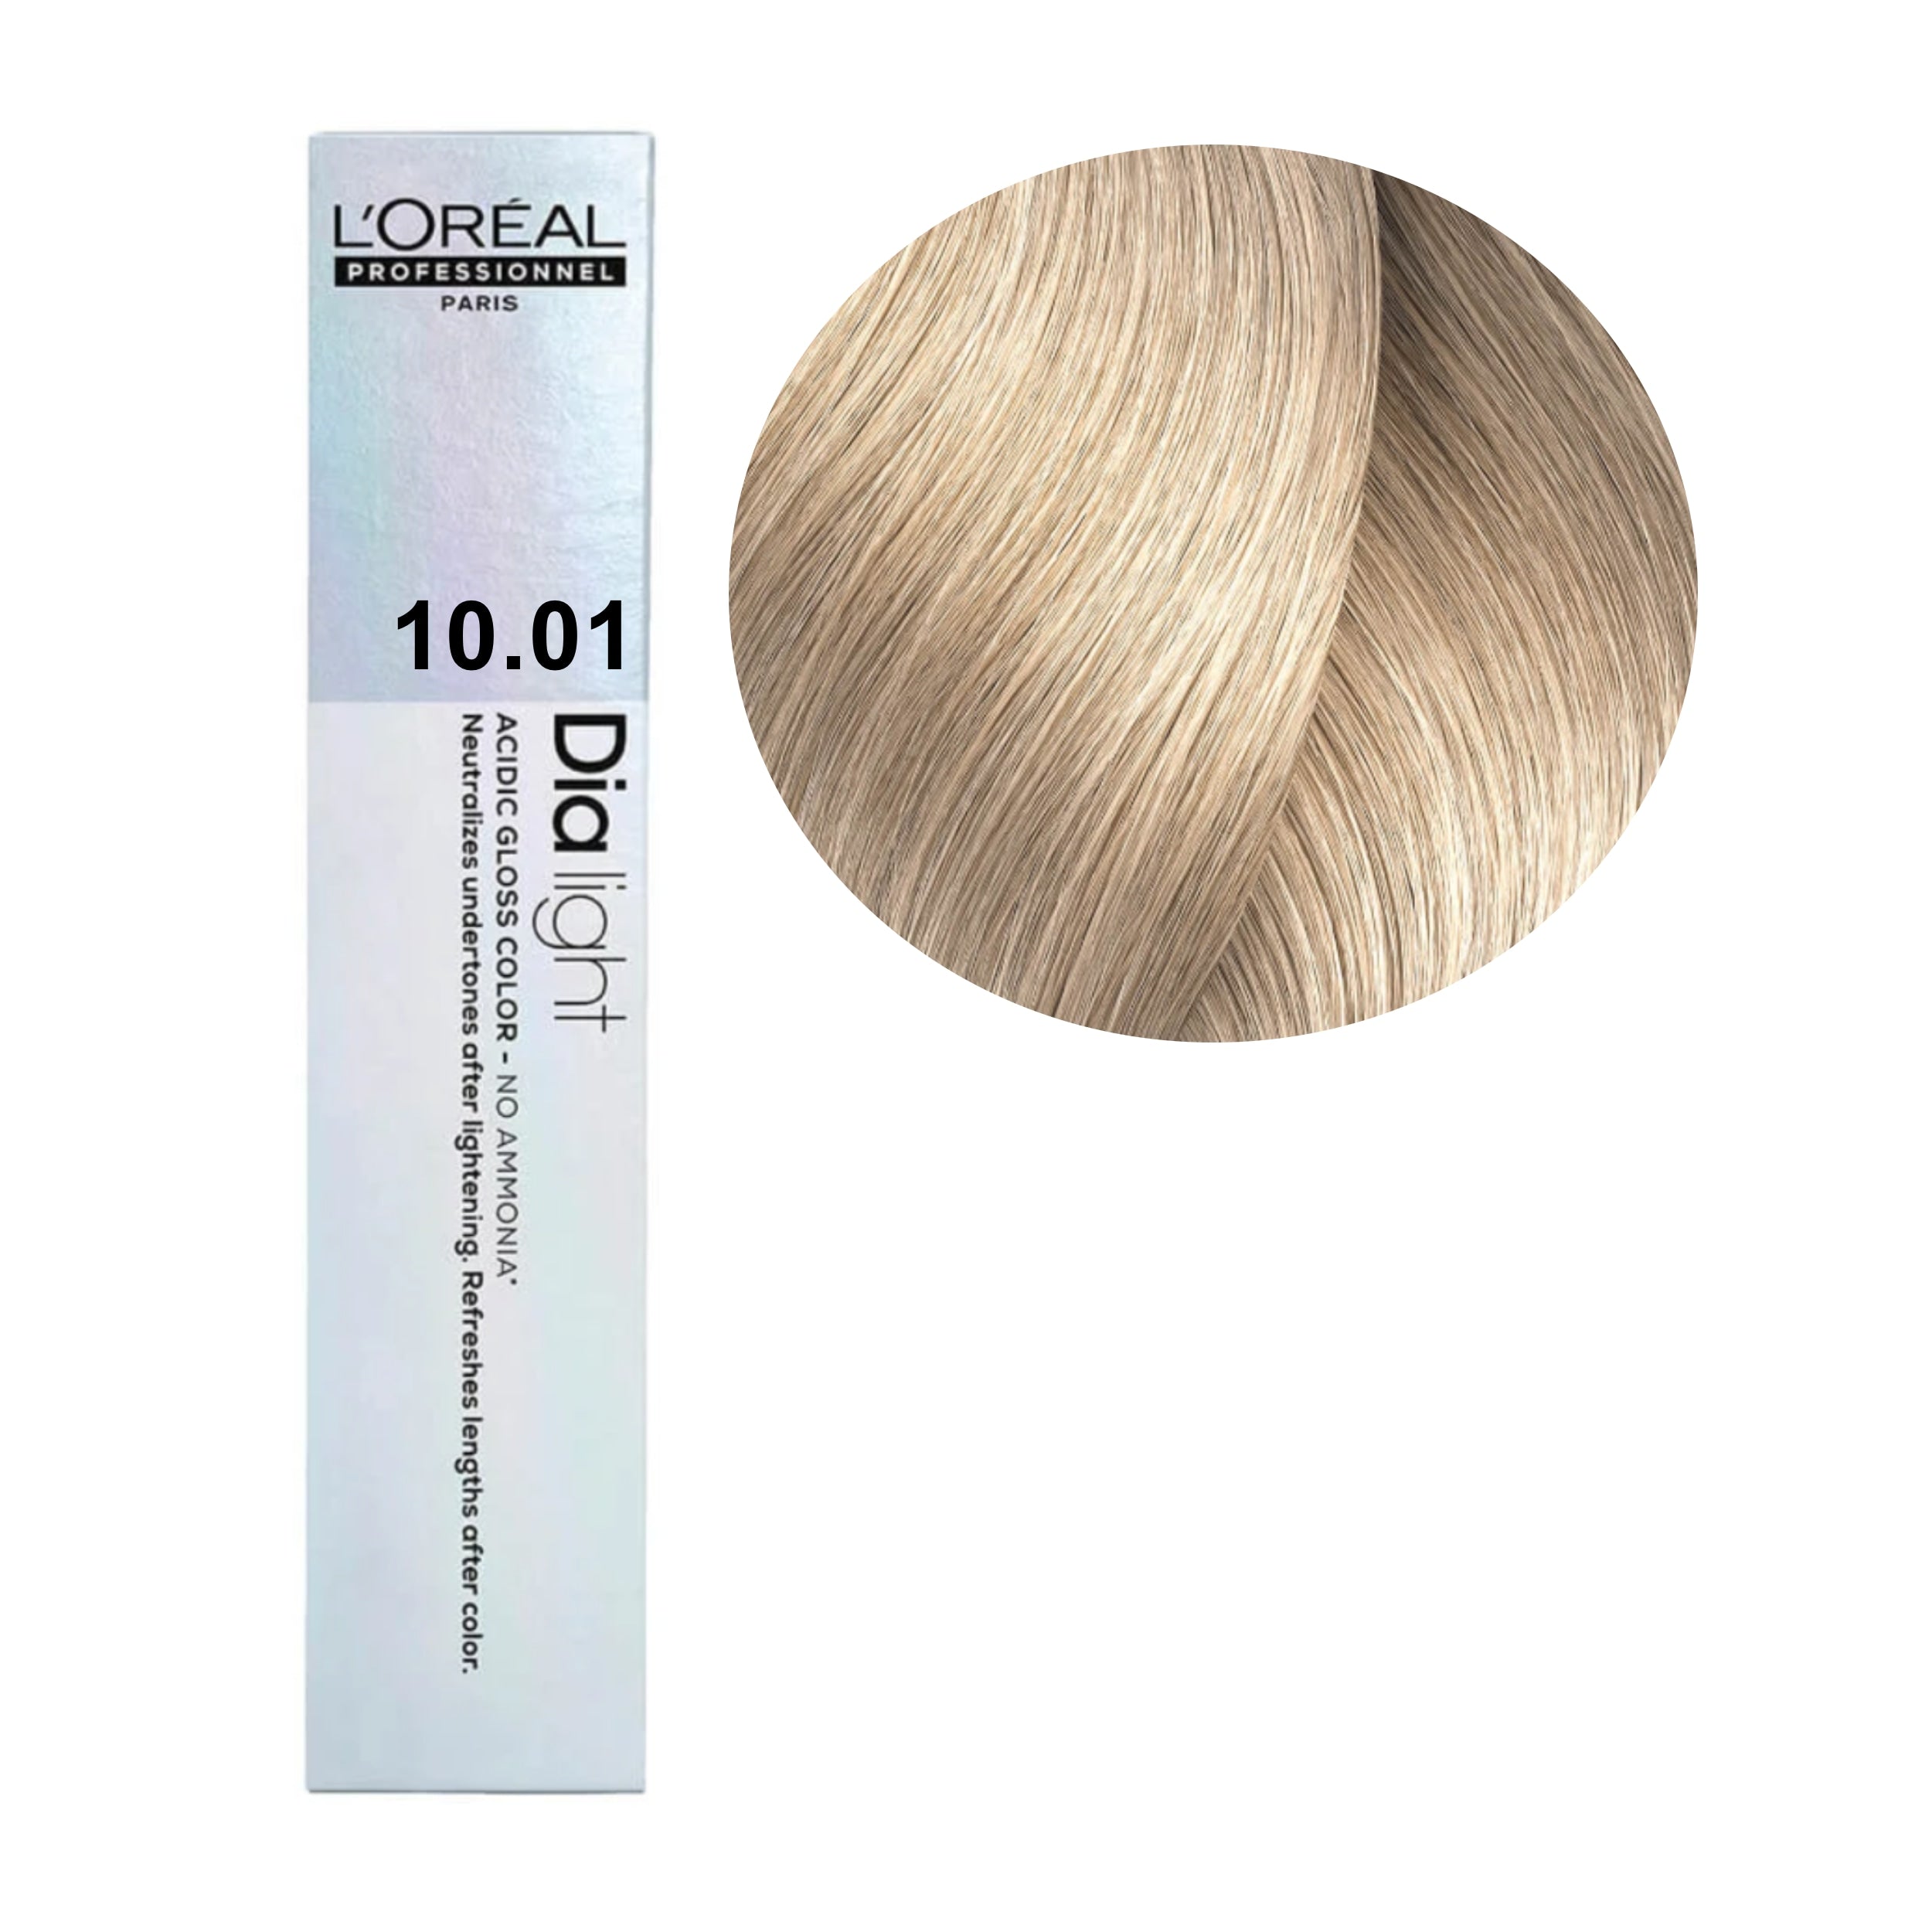 a tube of blonde hair with a white background